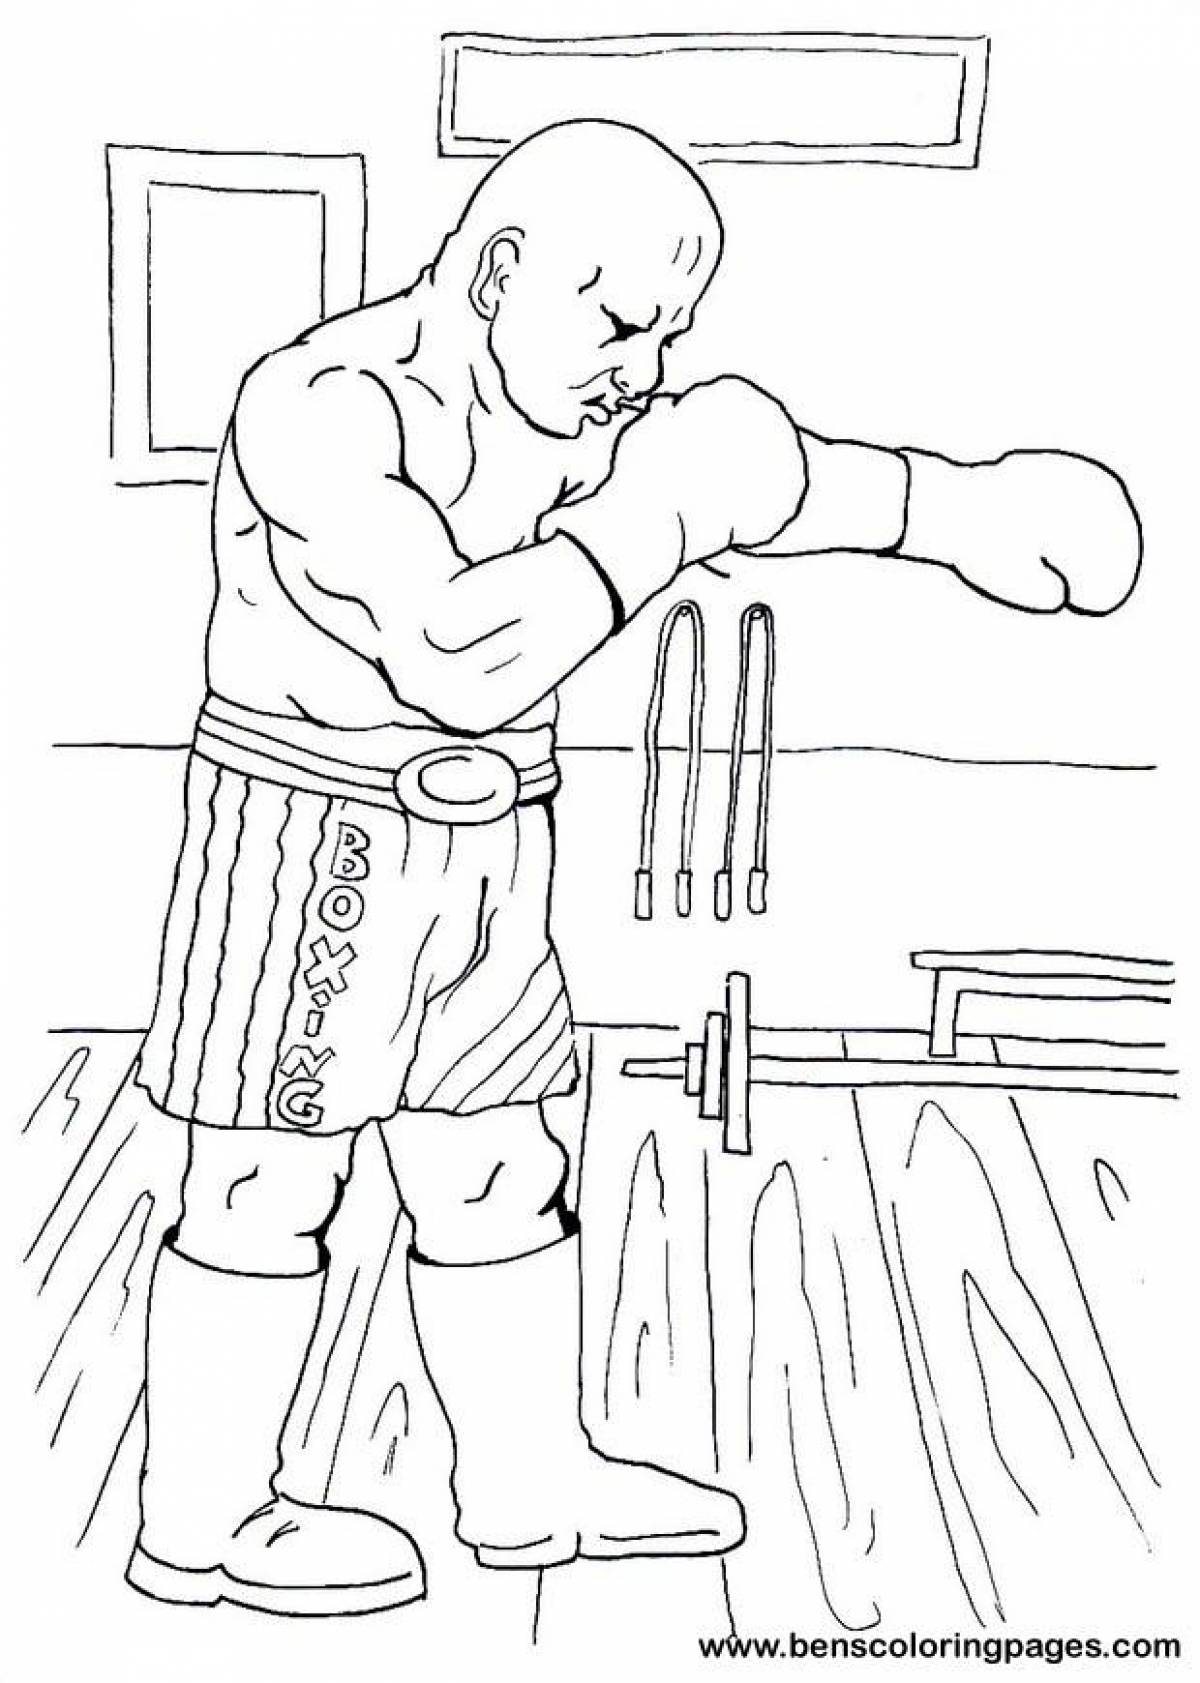 Exciting boxing and boo coloring page